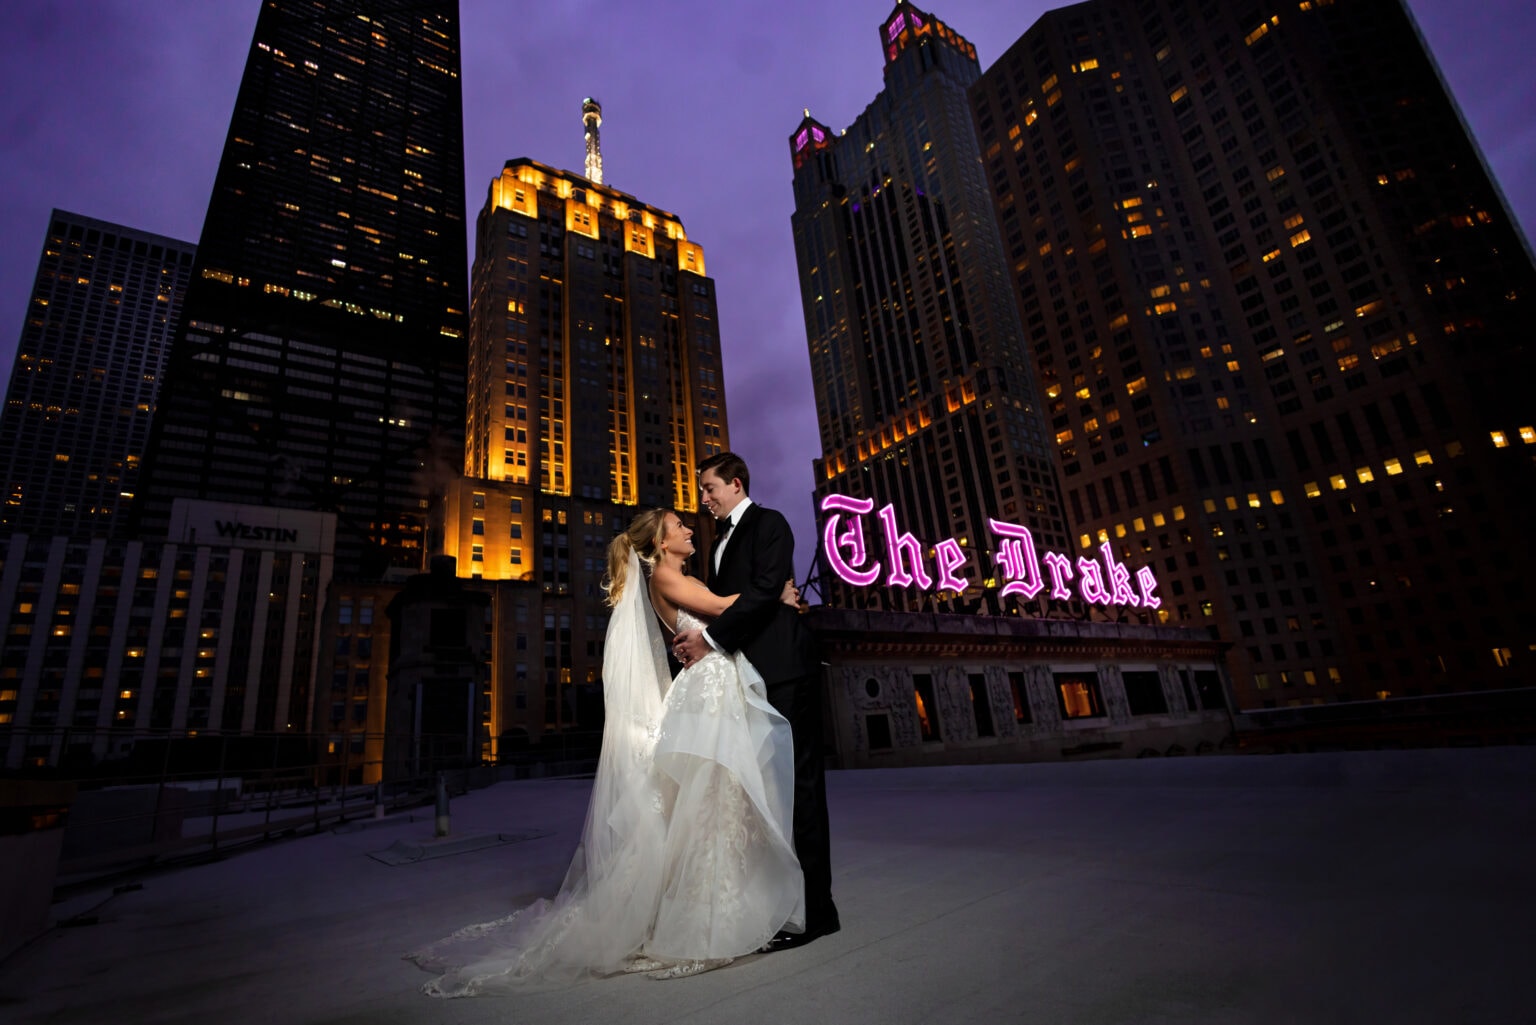 Bride and Groom pose for wedding portrait on top of the Drake Hotel Roof with the Chicago Skyline in the background at dusk